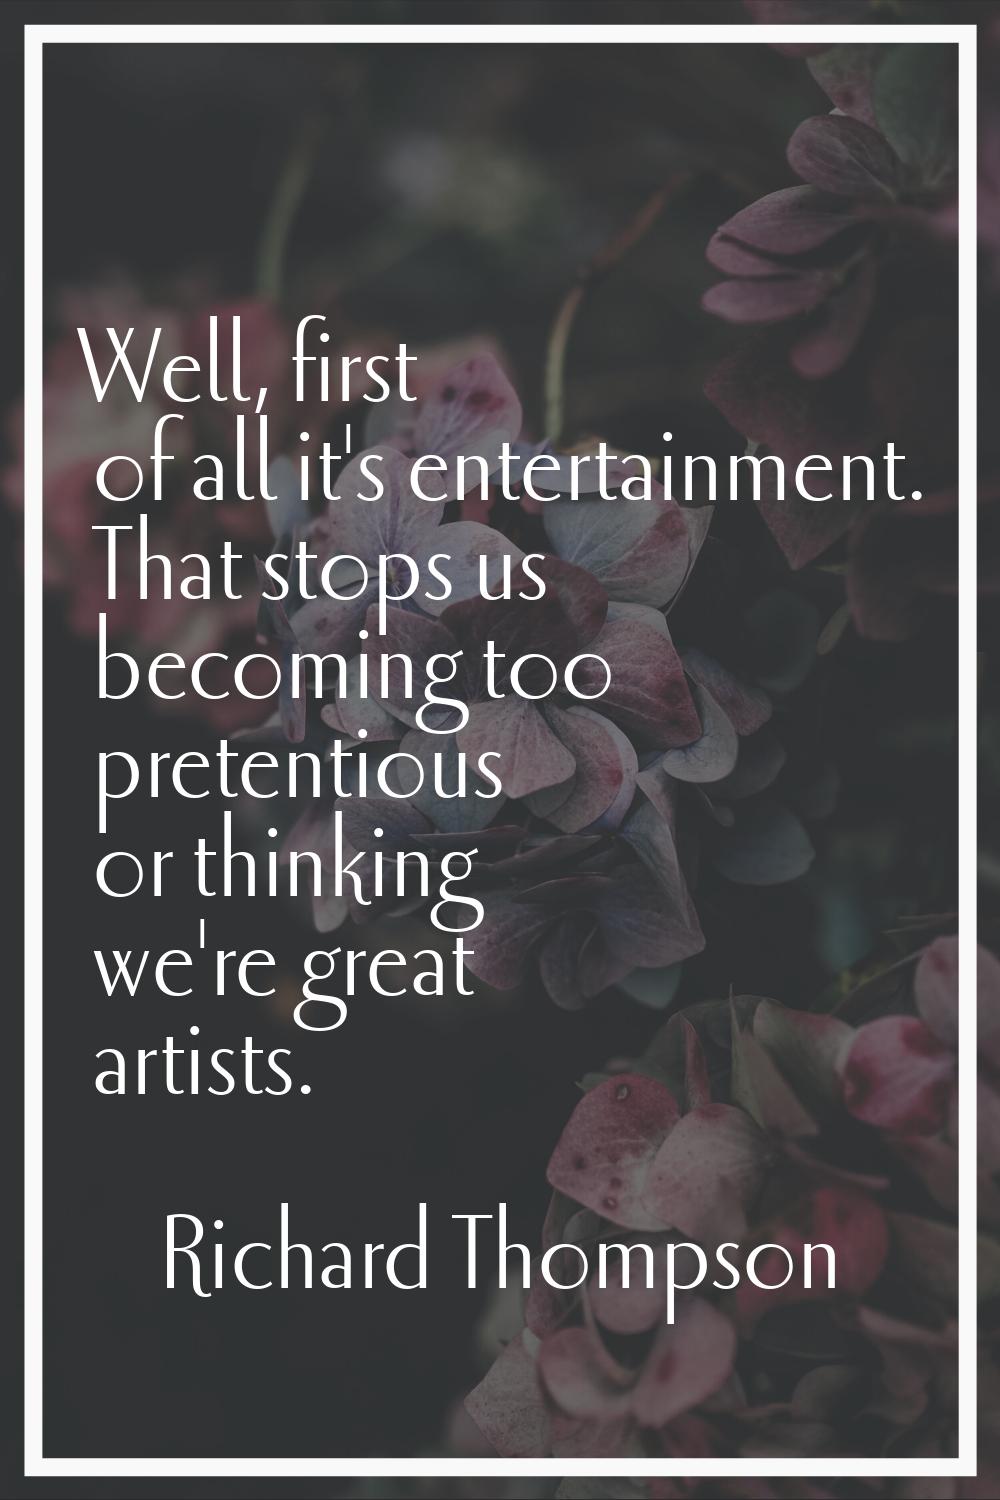 Well, first of all it's entertainment. That stops us becoming too pretentious or thinking we're gre